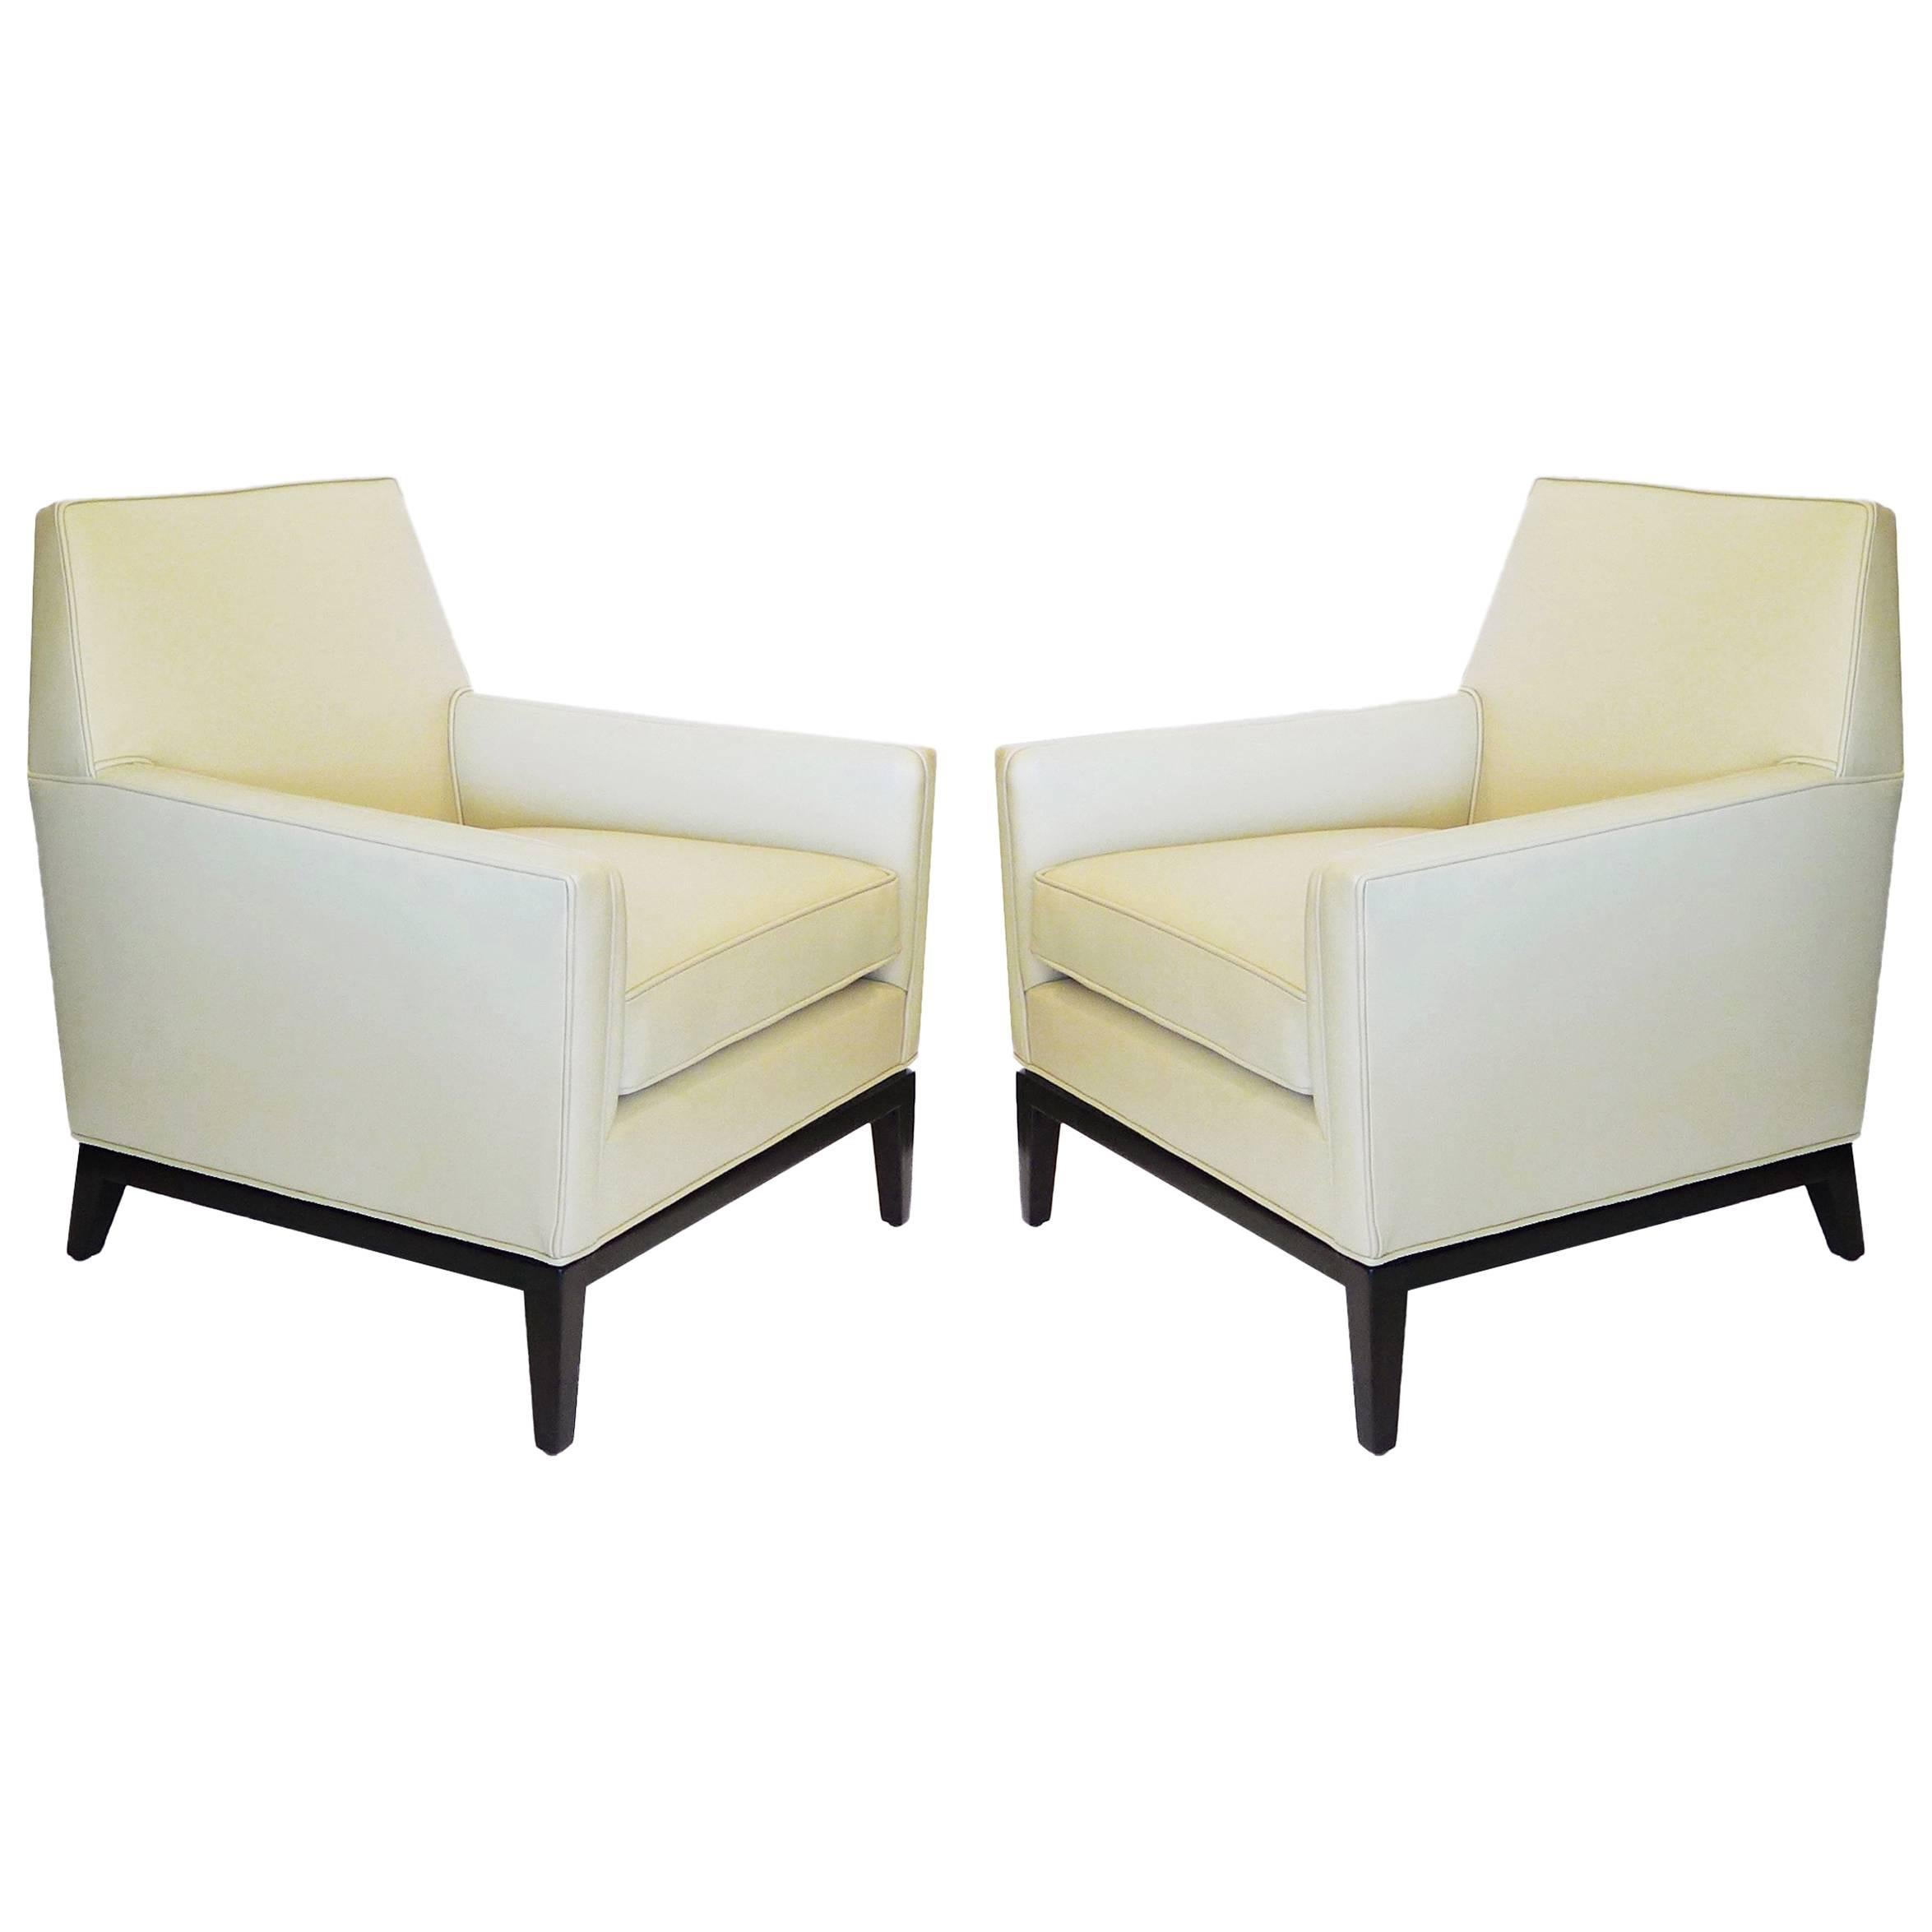 Pair of Edwar Wormley Chairs for Dunbar in Vanilla Leather For Sale